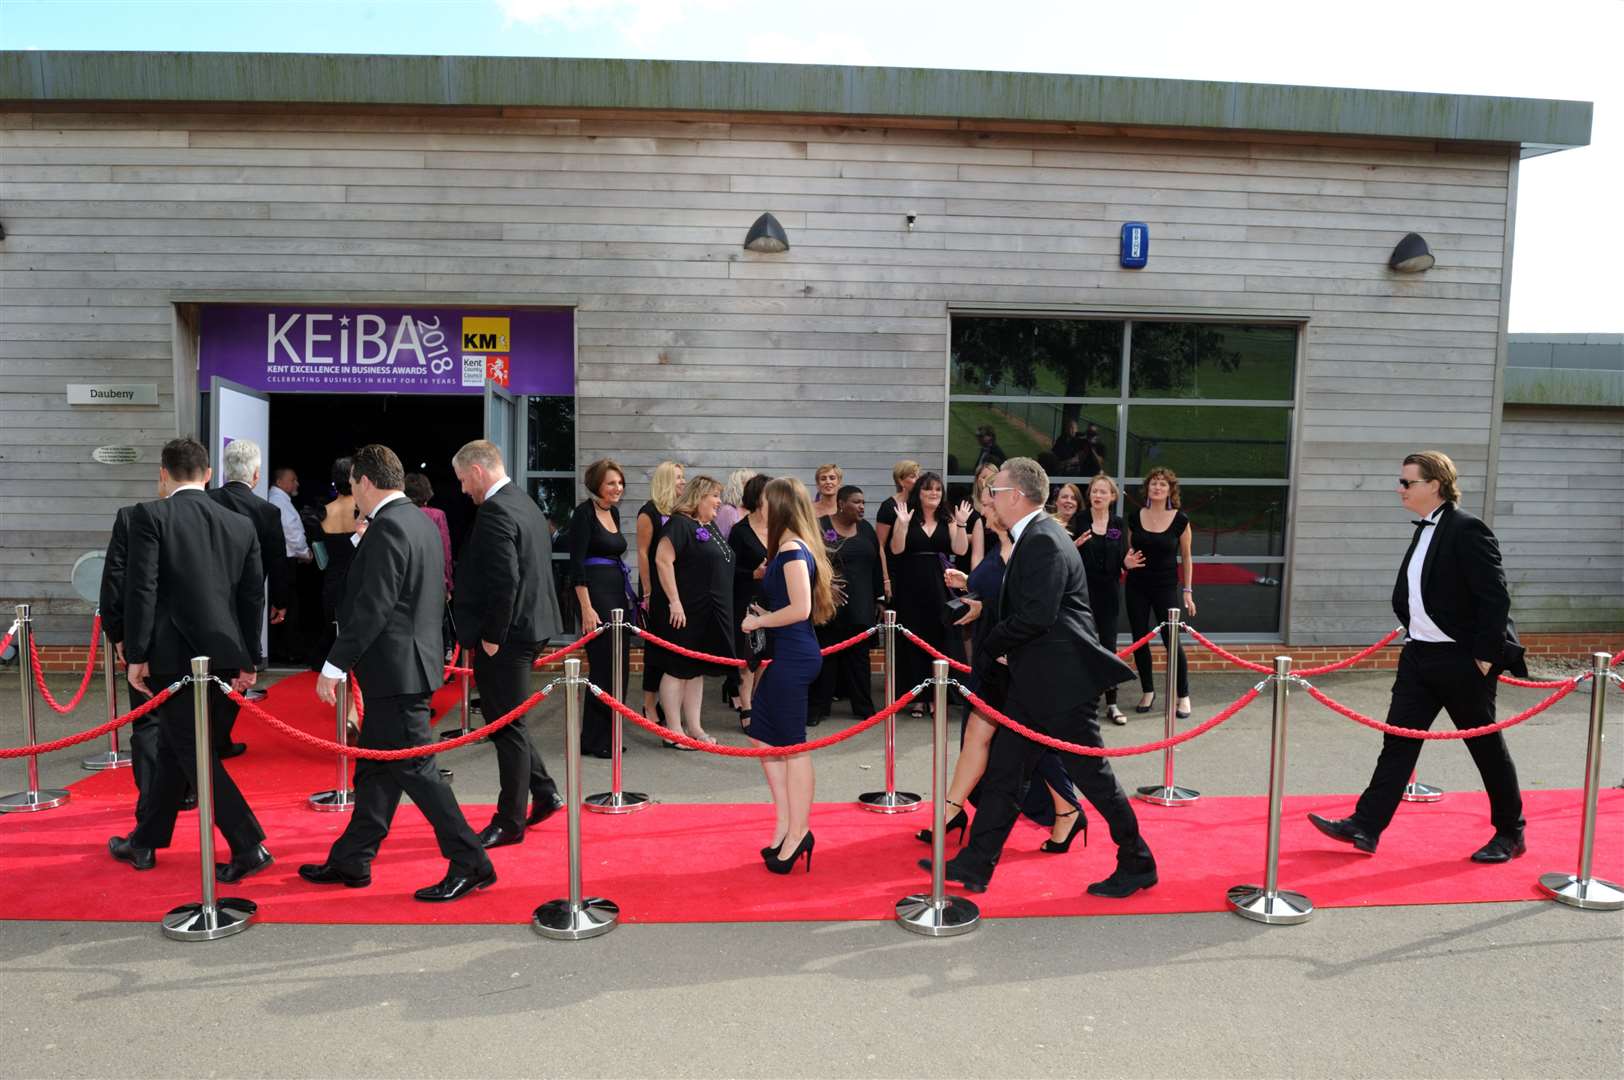 The Kent Event Centre will host the awards night later this year